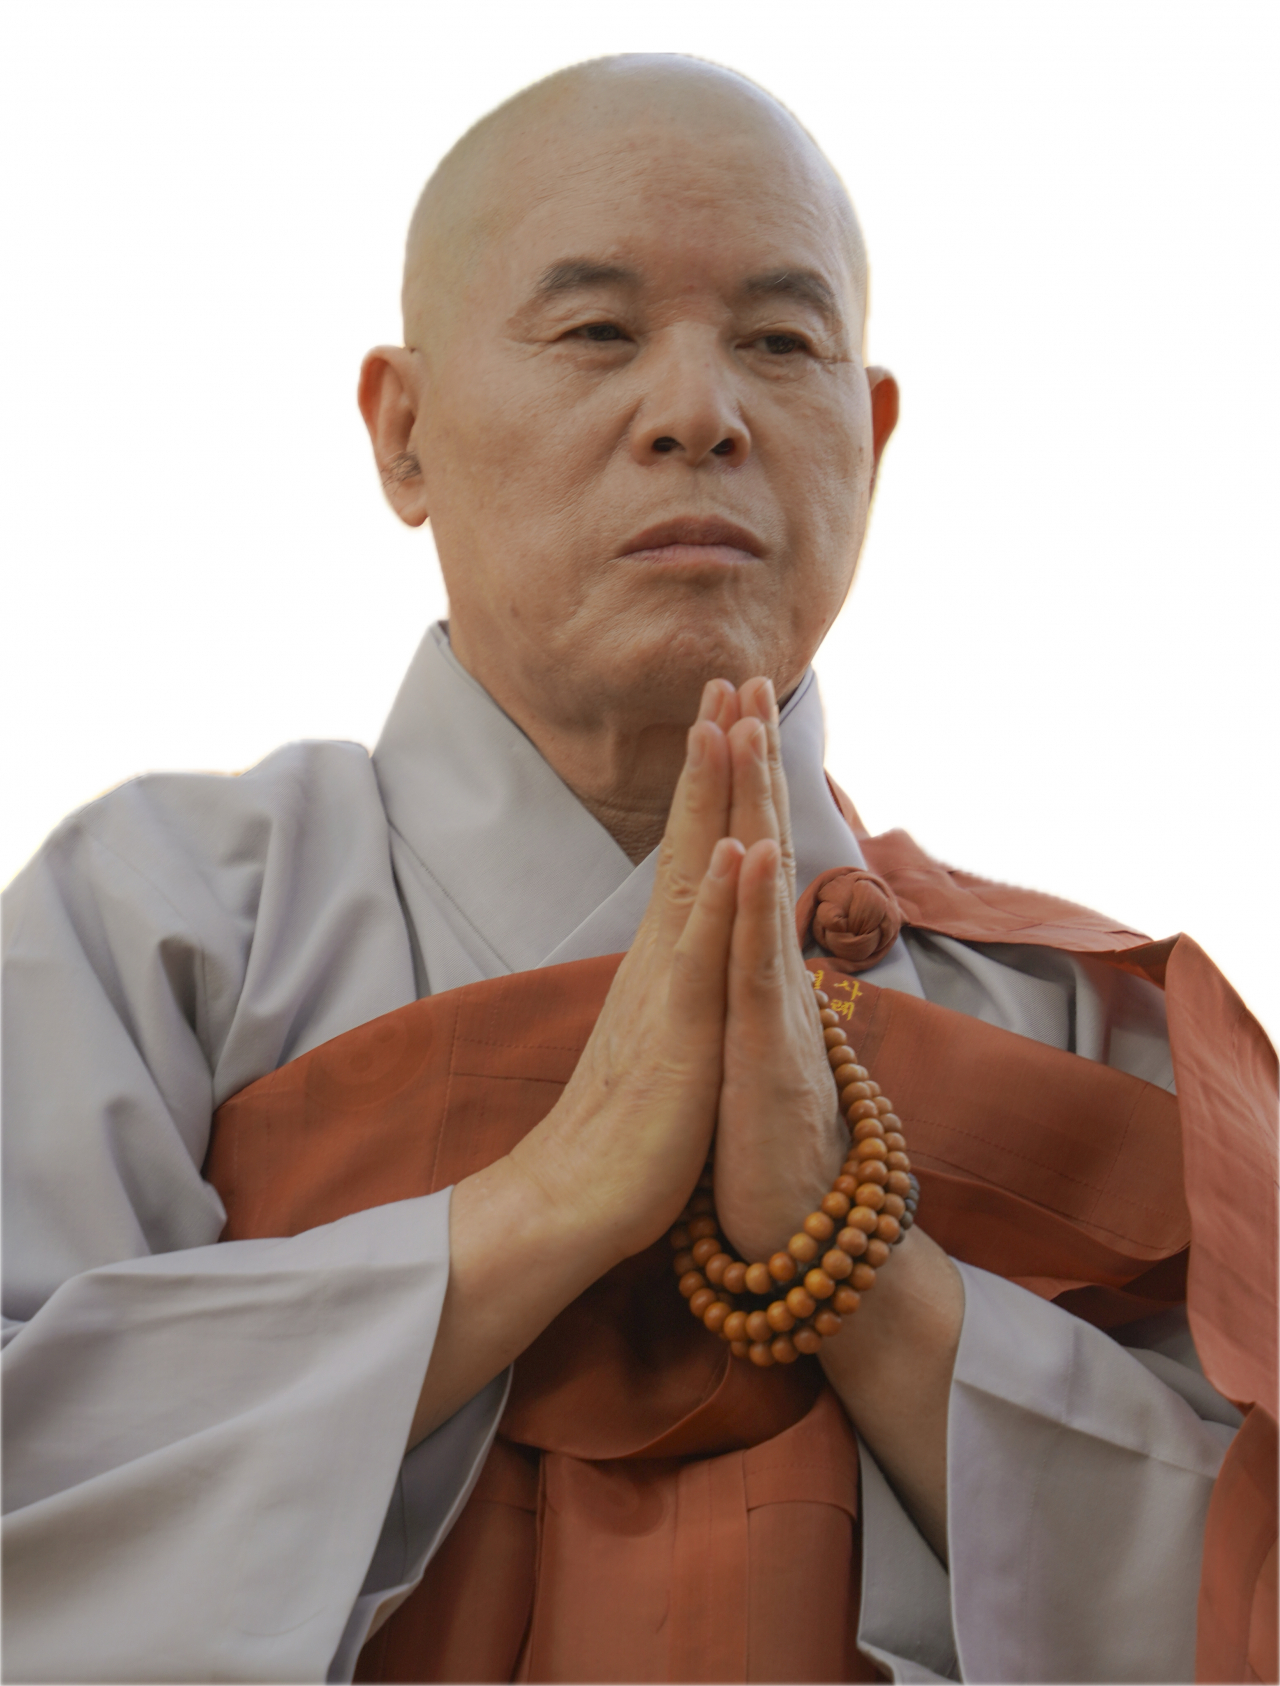 The Ven. Jaseung, former head of the Jogye Order, South Korea's largest Buddhist sect (Jogye Order)